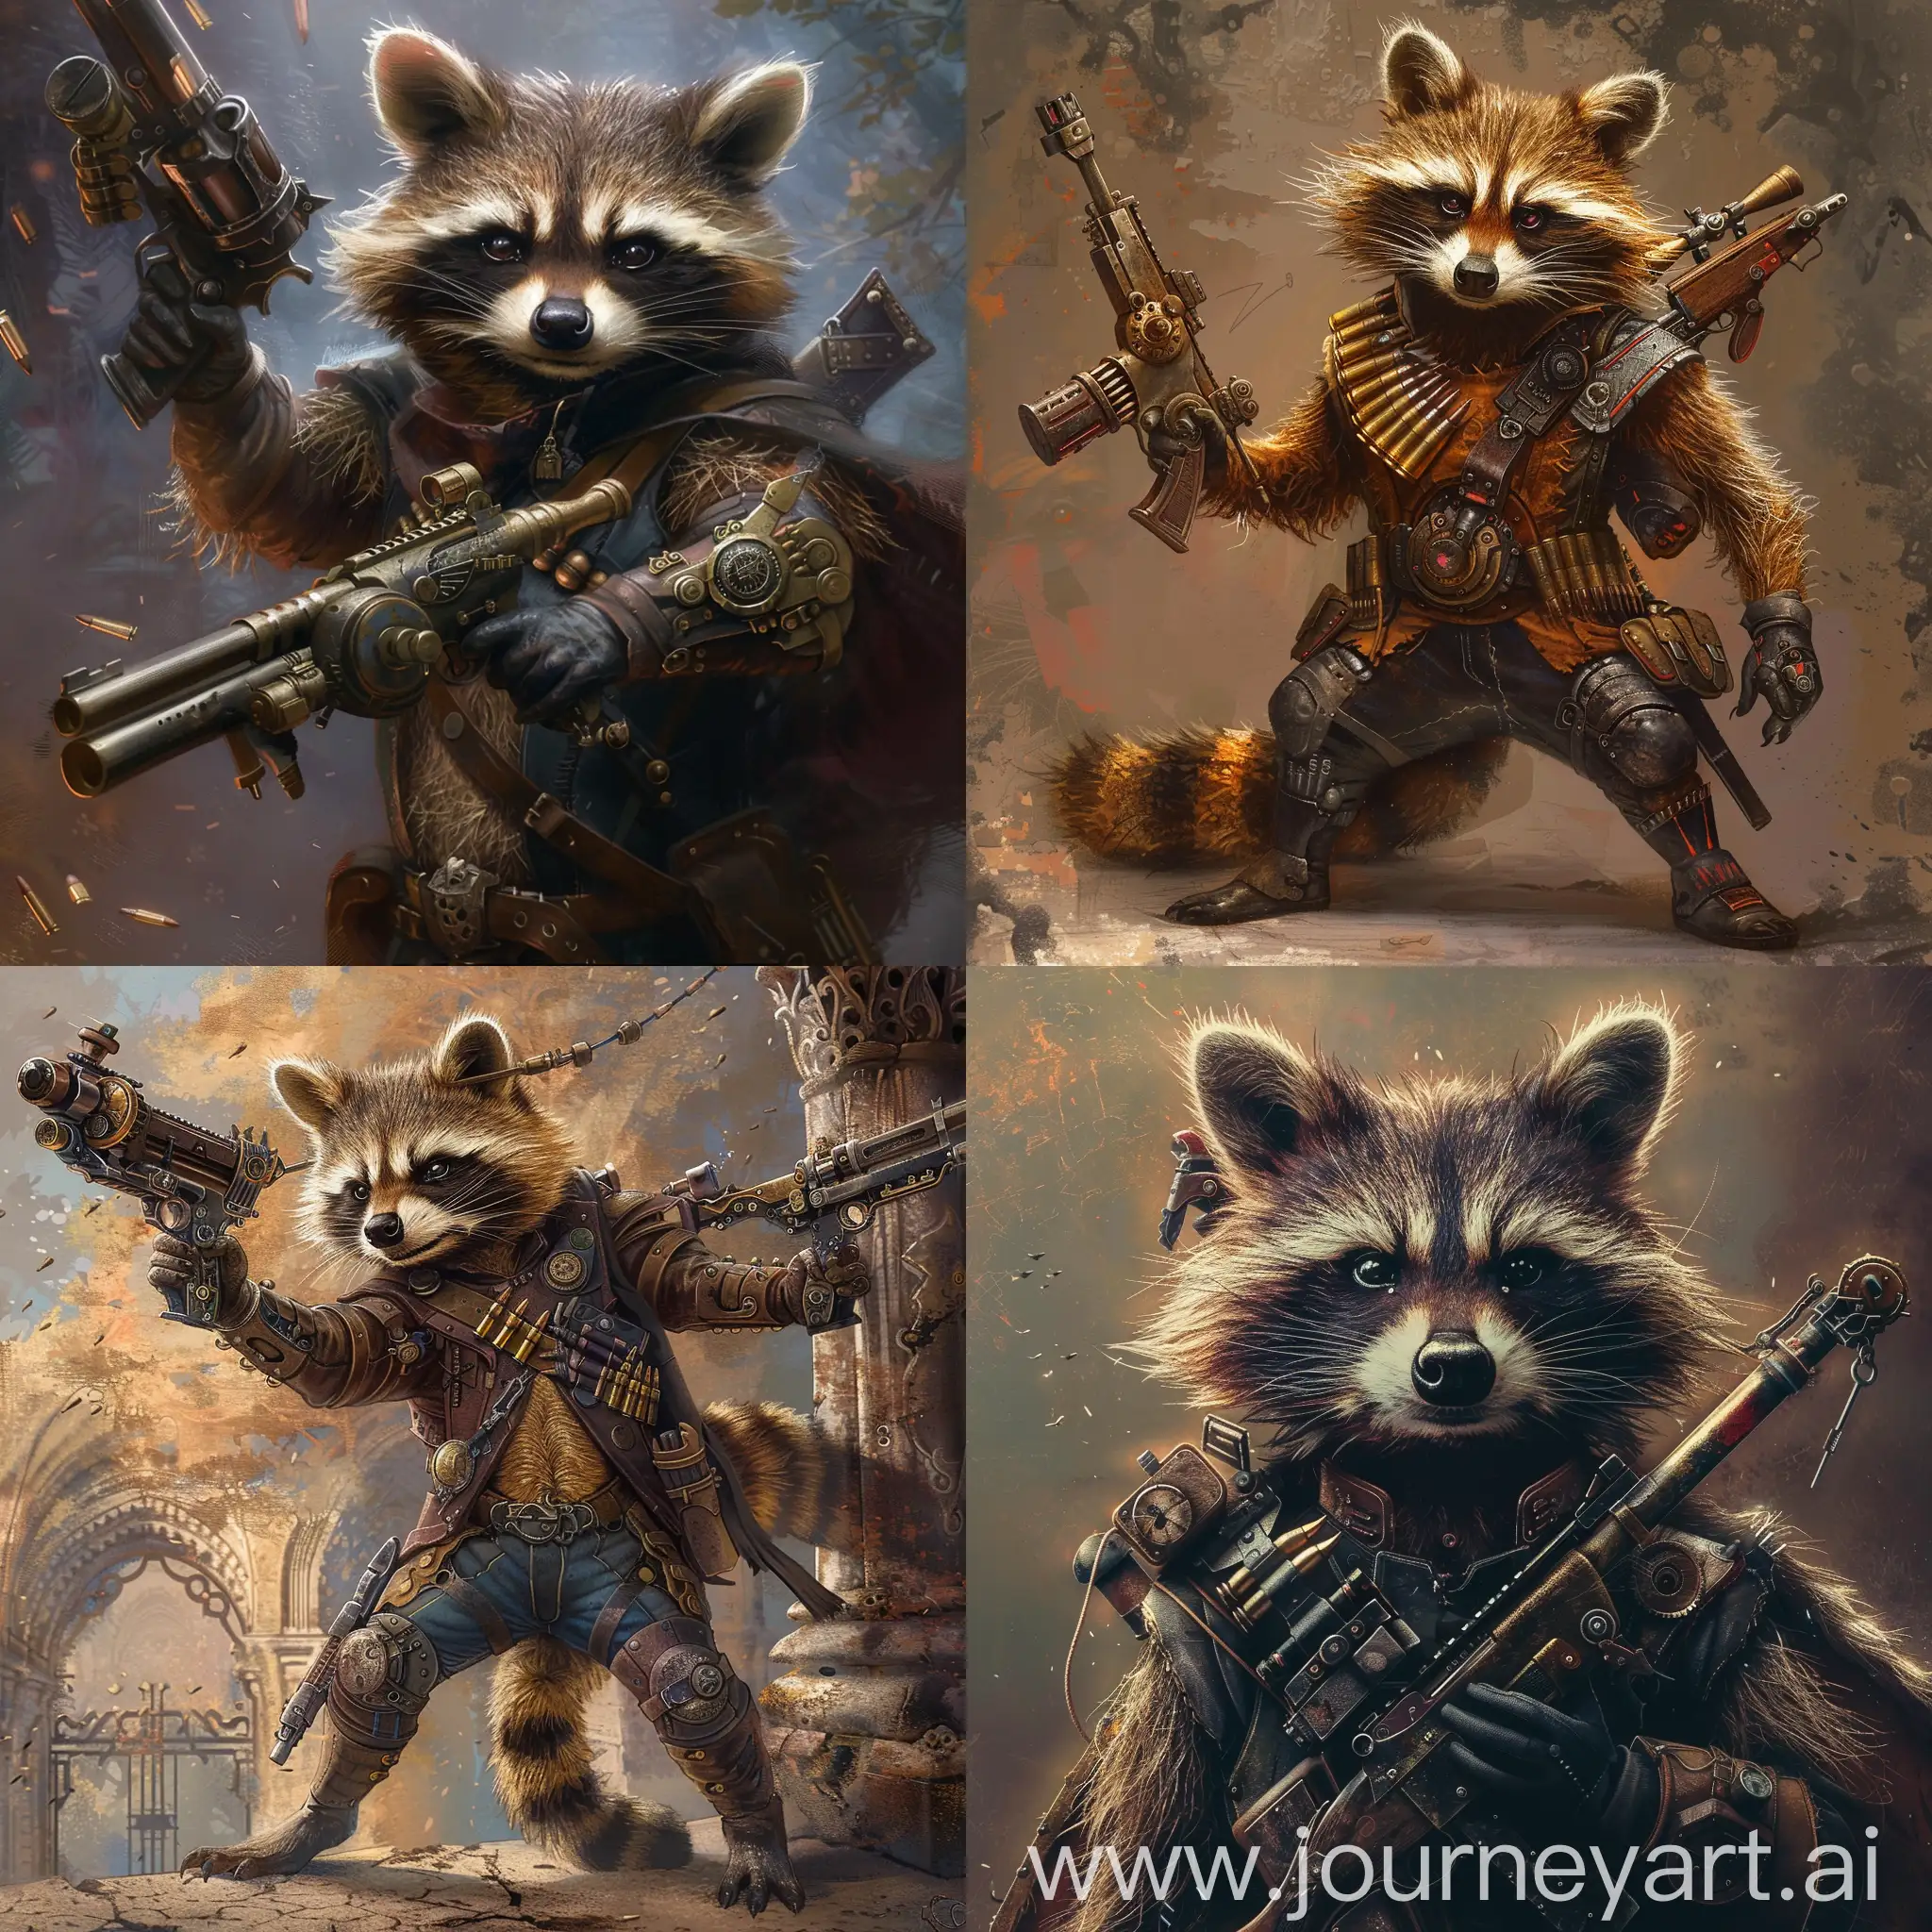 Rocket raccoon with a steampunk and medieval style and guns